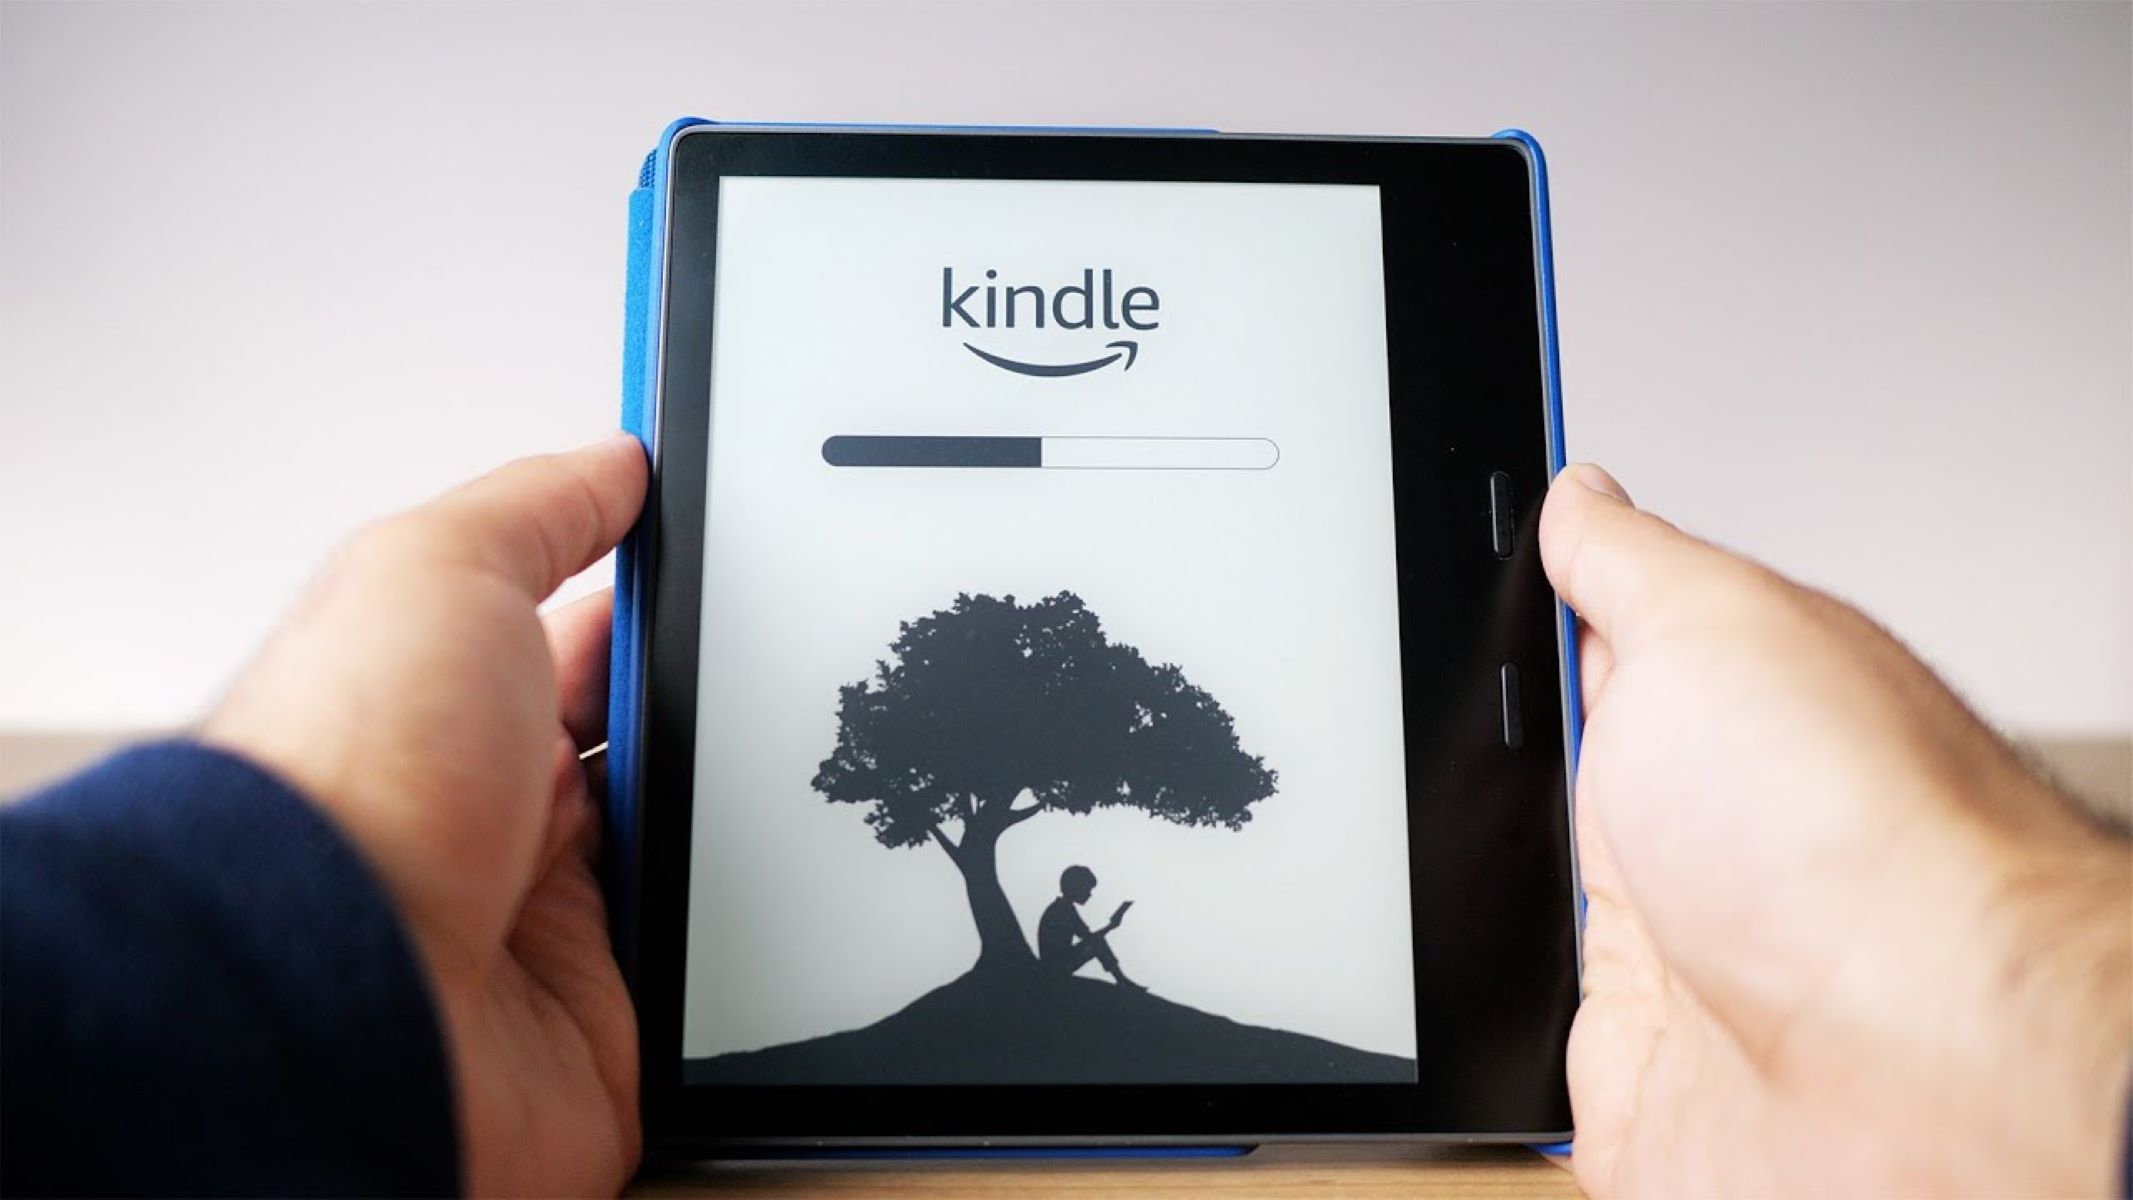 How To Set Up A Kindle Account